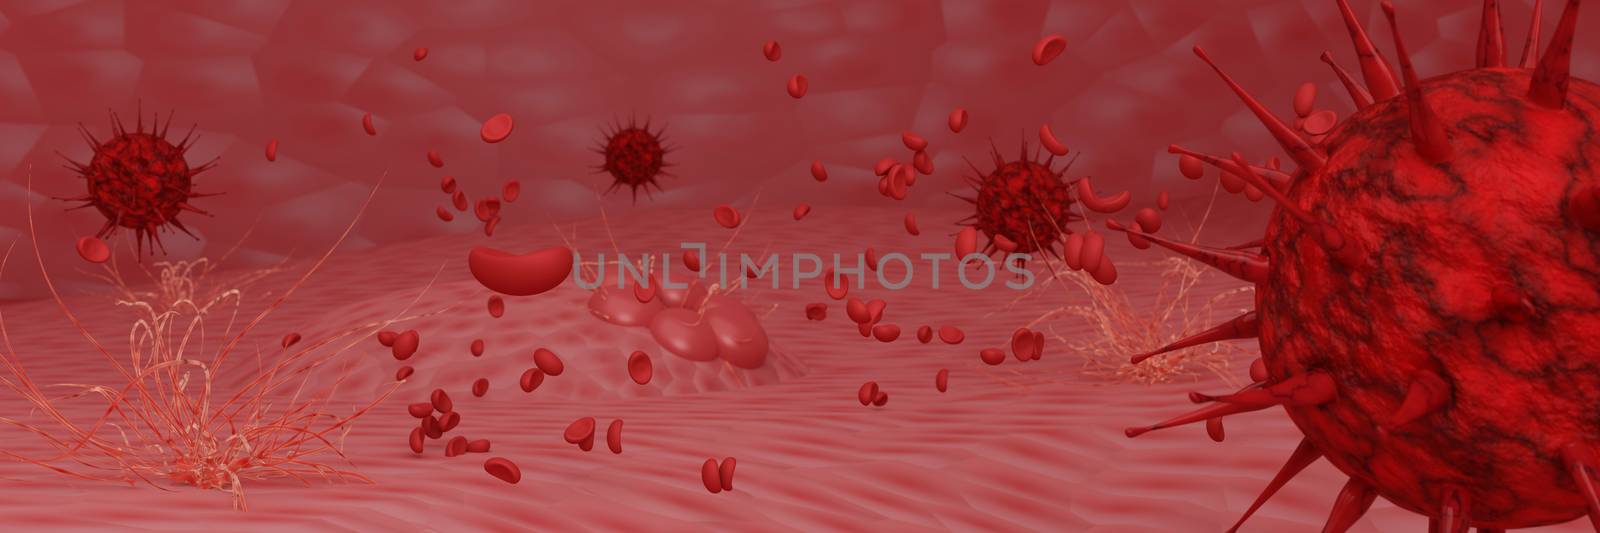 Model for Coronavirus Covid-19 outbreak and coronaviruses influenza concept   dangerous flu strain cases as a pandemic medical health risk  with disease cell as a 3D render